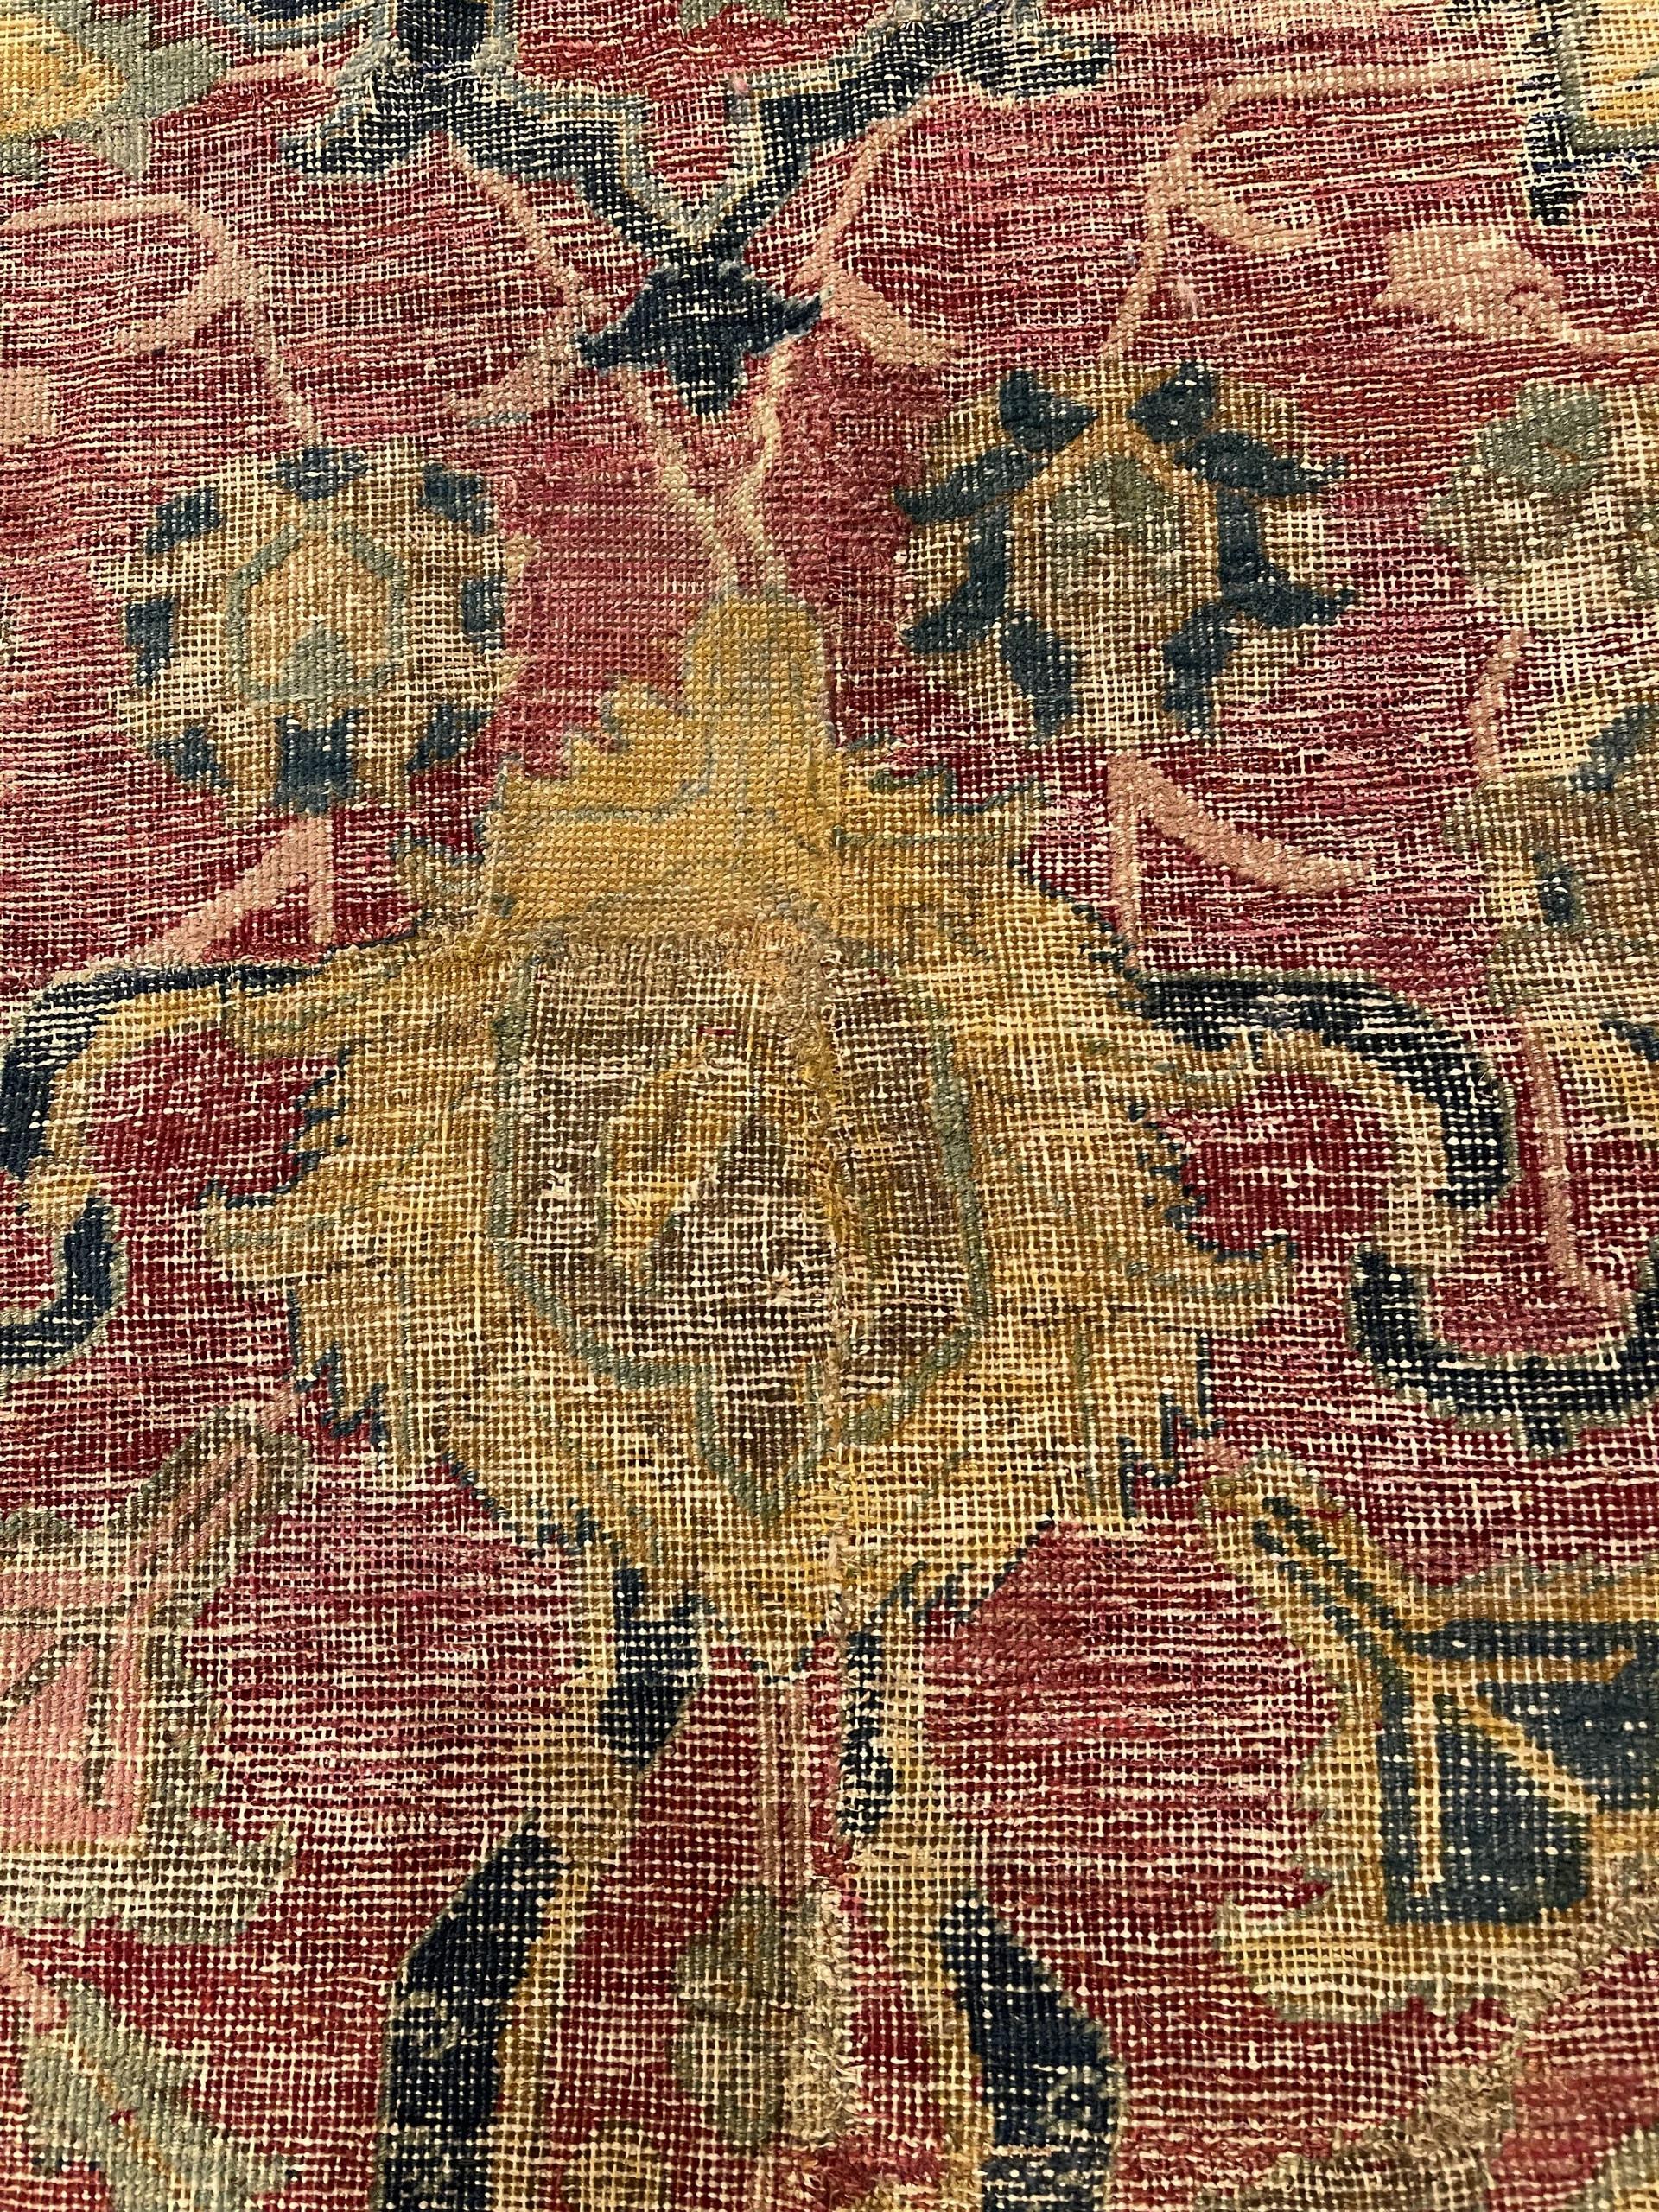 A Breathtaking Rare 17th Century Large Antique Persian Isfahan Rug, Country of Origin / Rug Type: Antique Persian Rugs, Circa Date: 17th Century